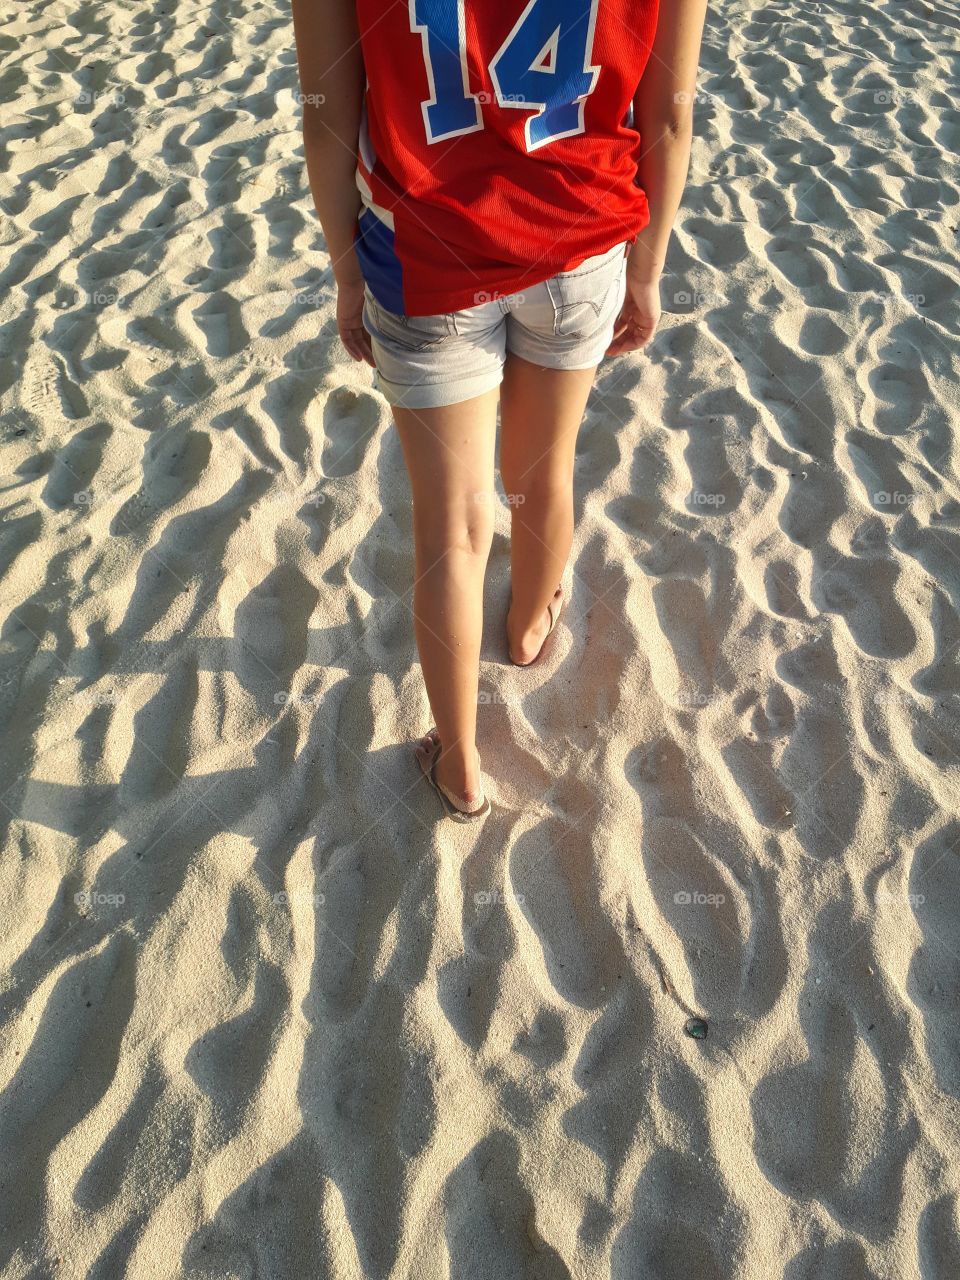 Walking in the sand